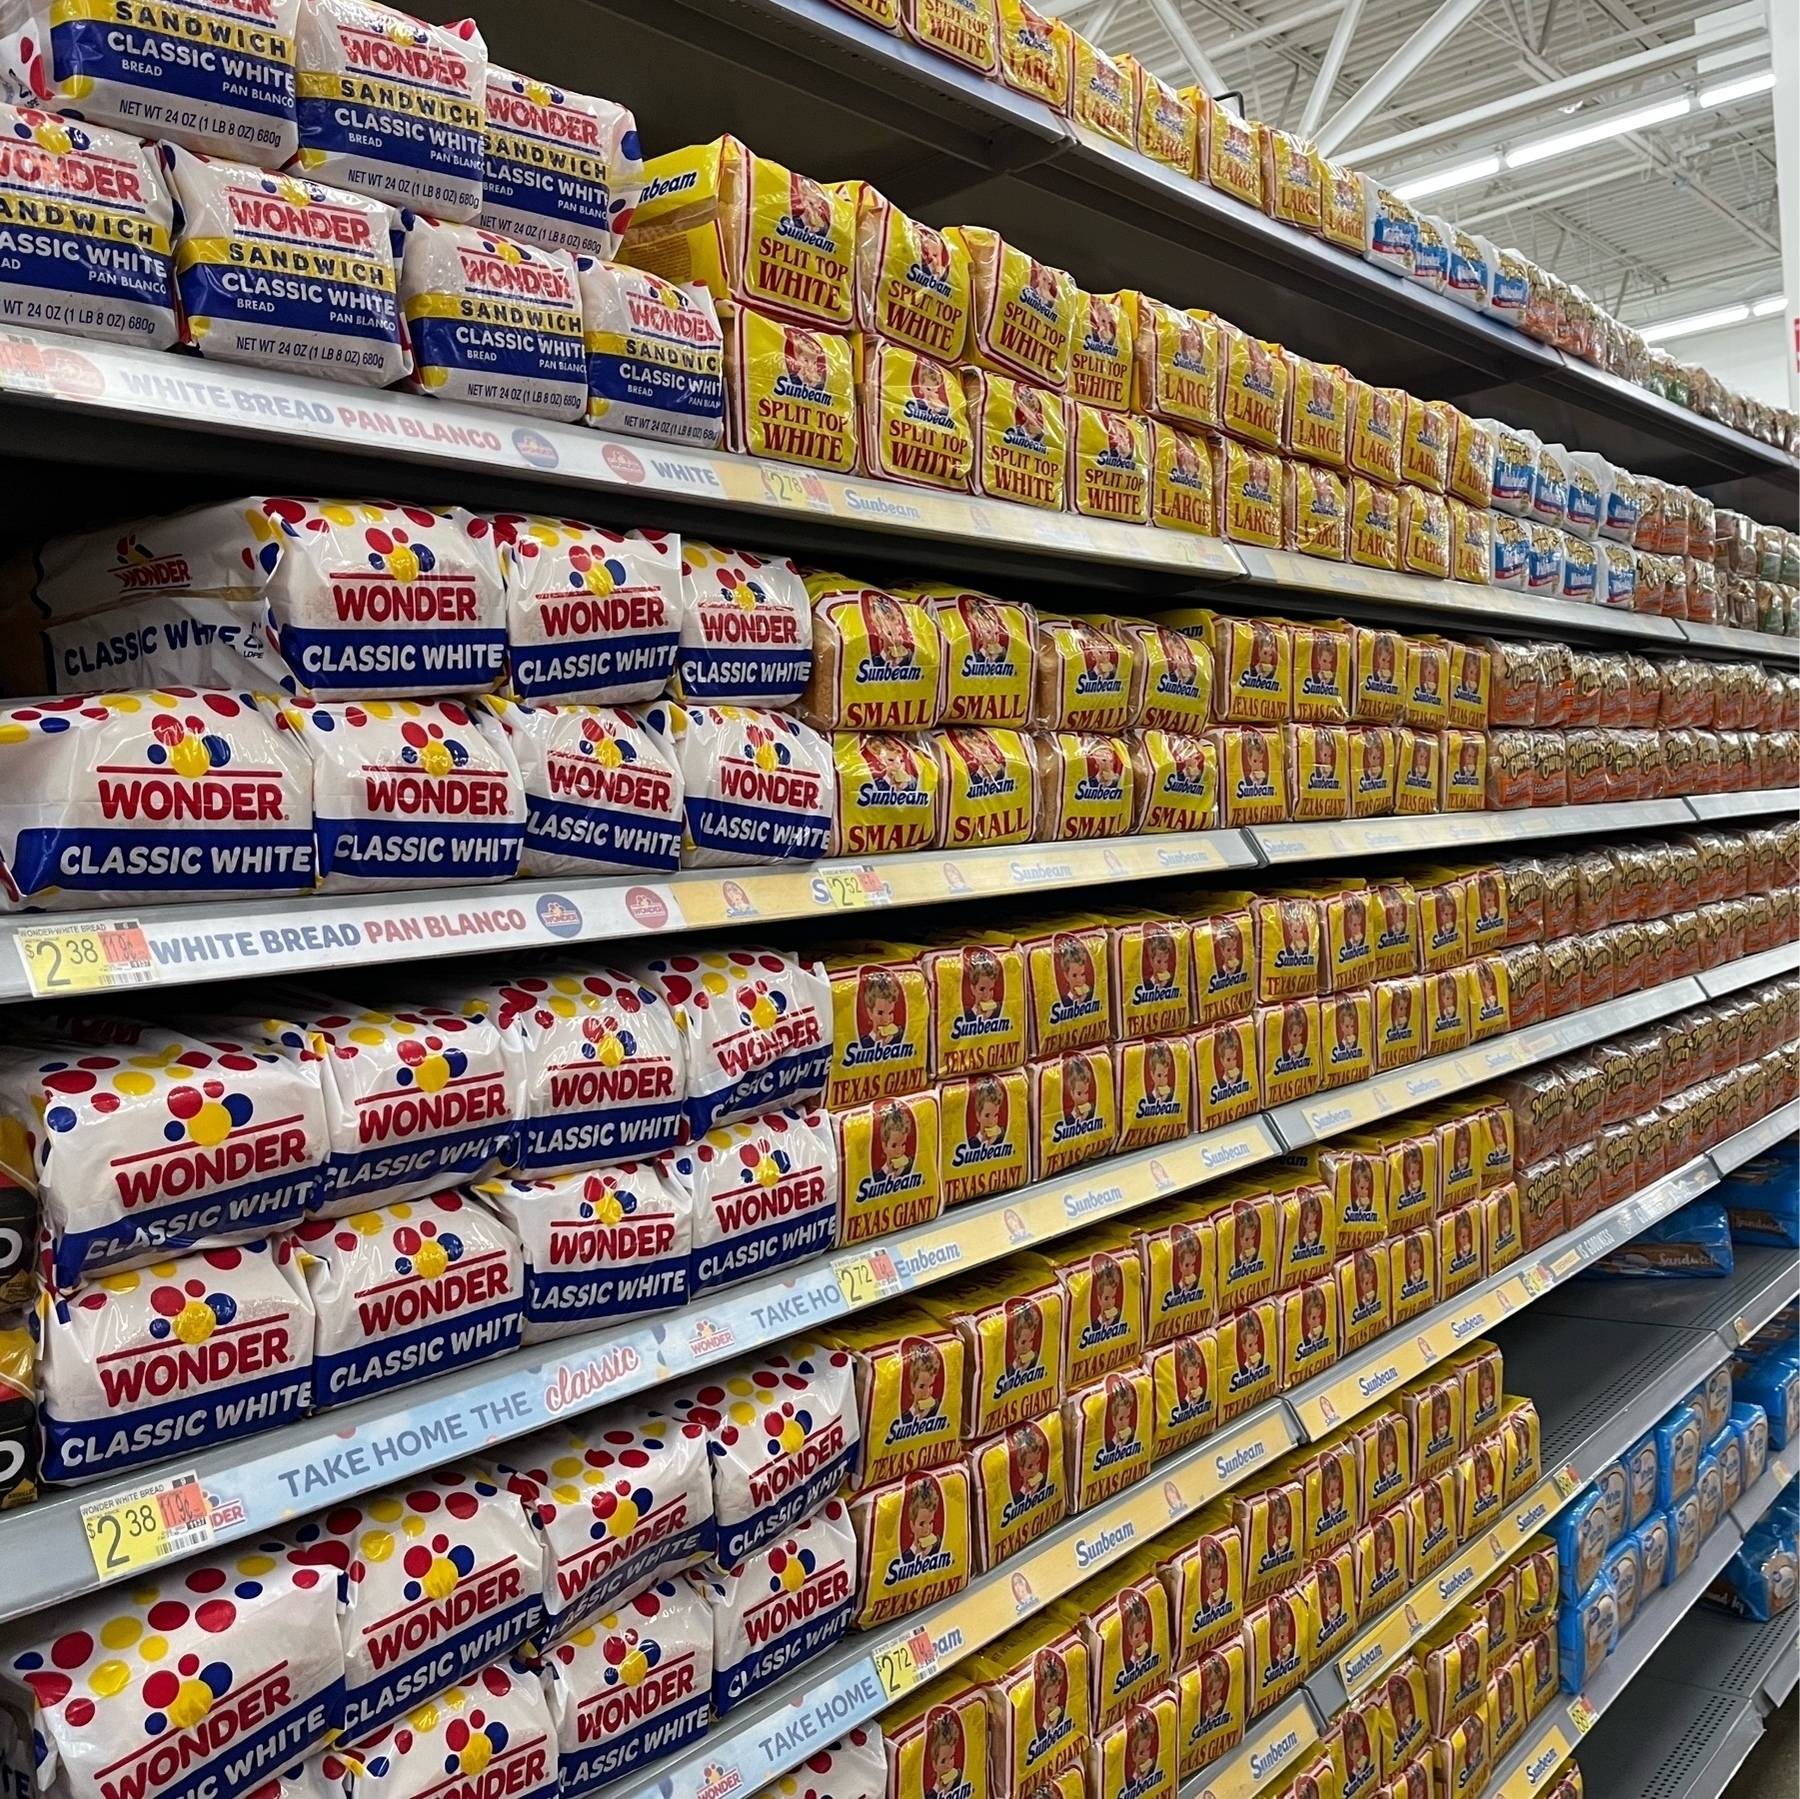 Bread on the grocery store shelves